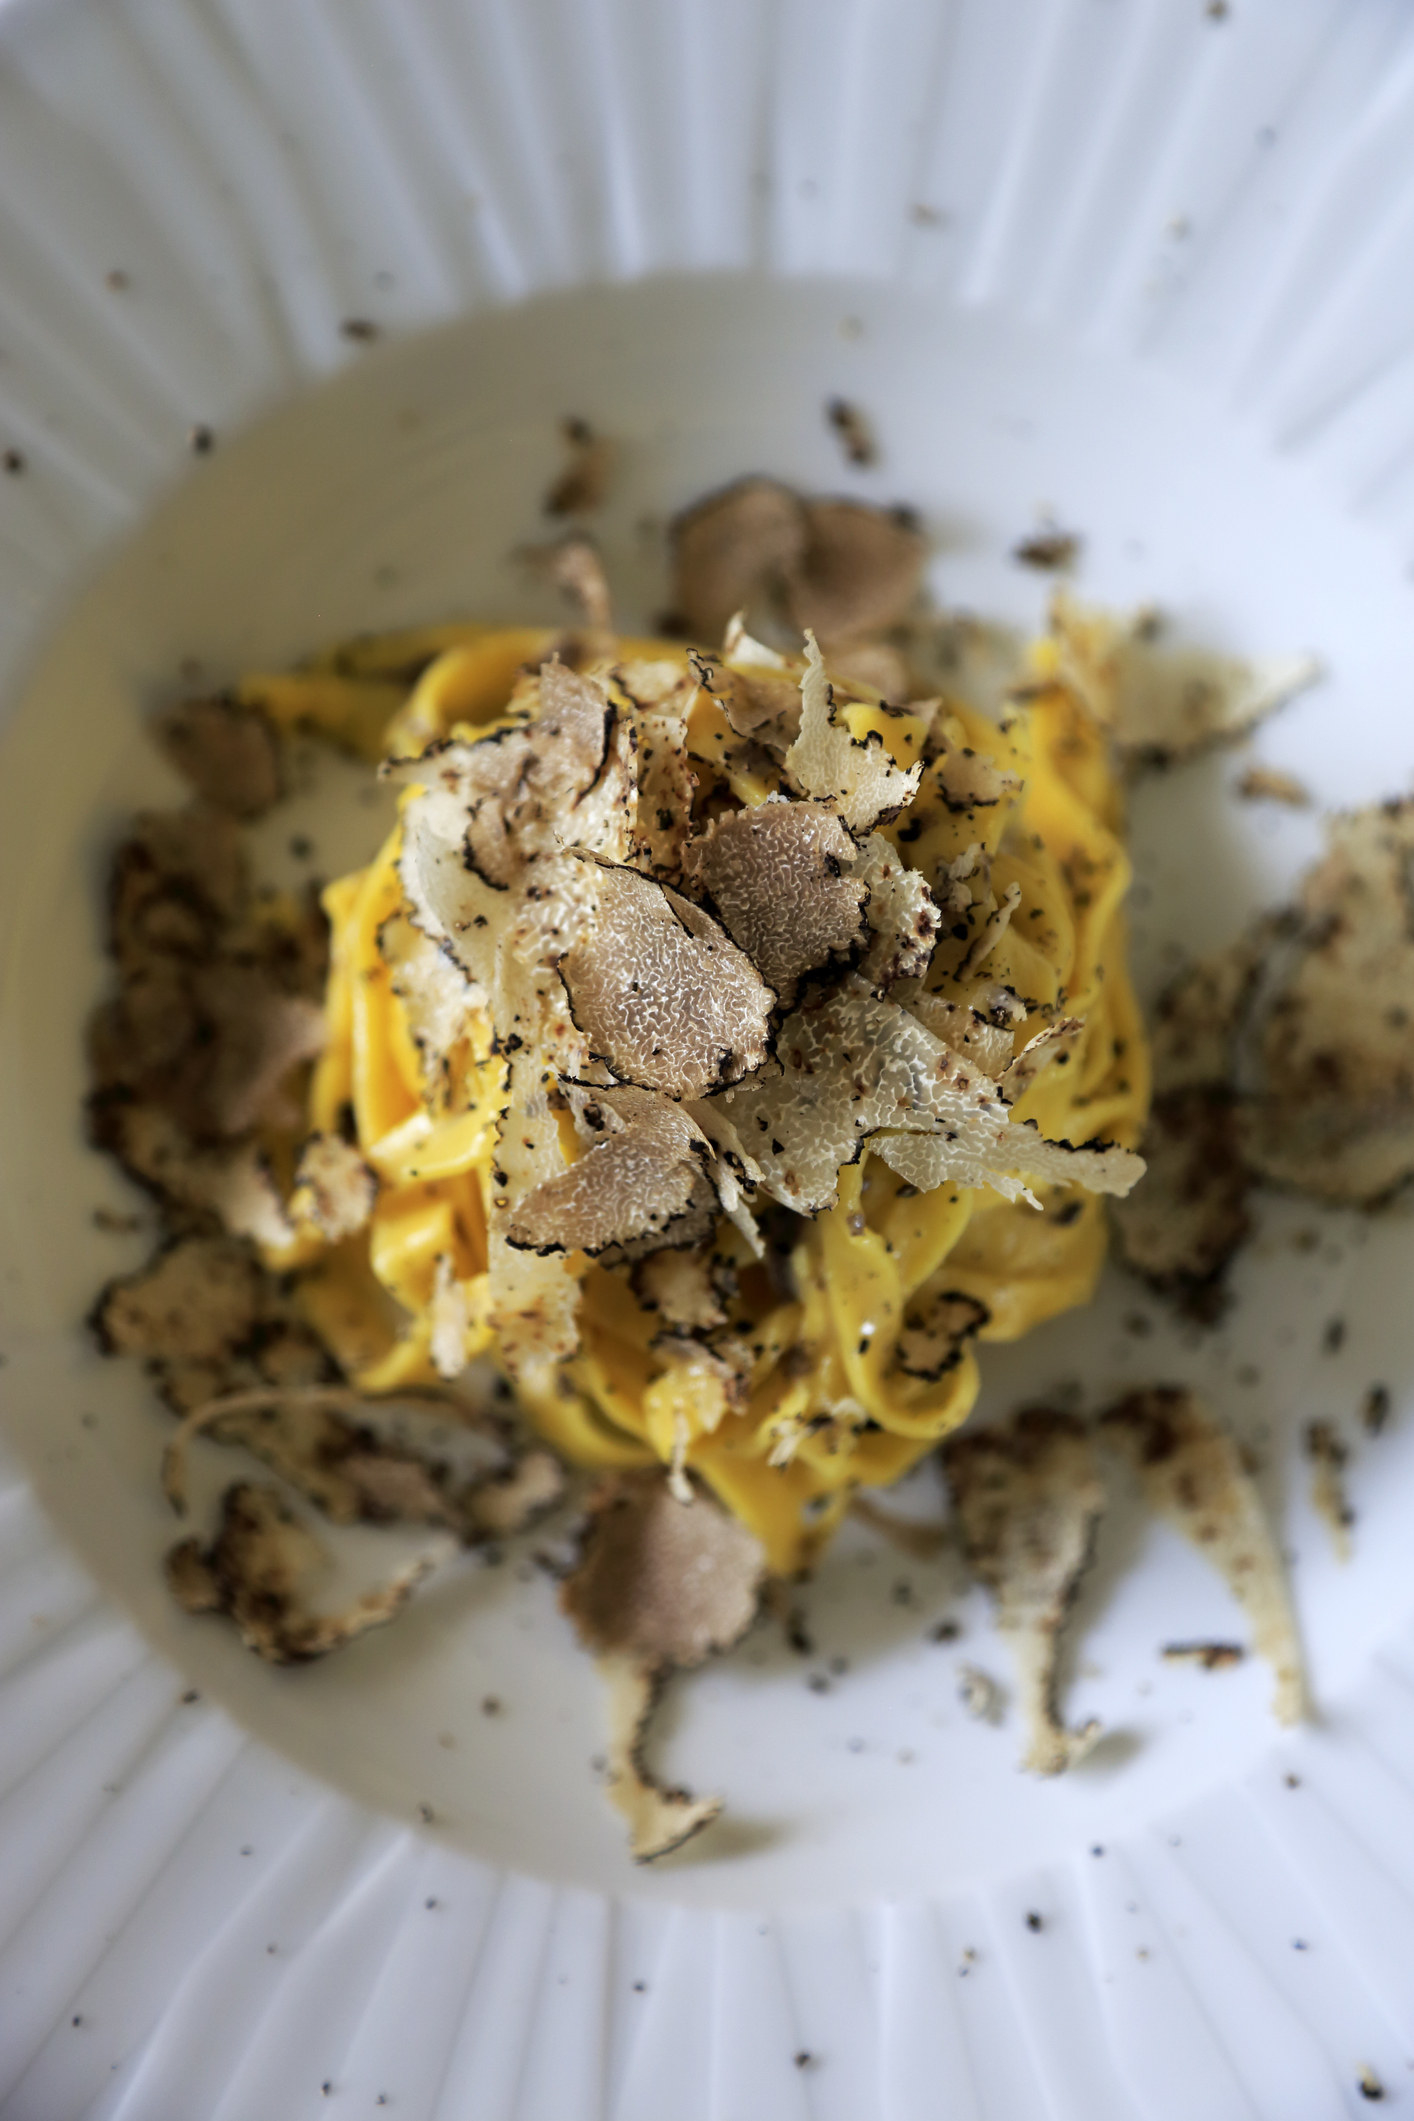 Egg pasta topped with truffles.